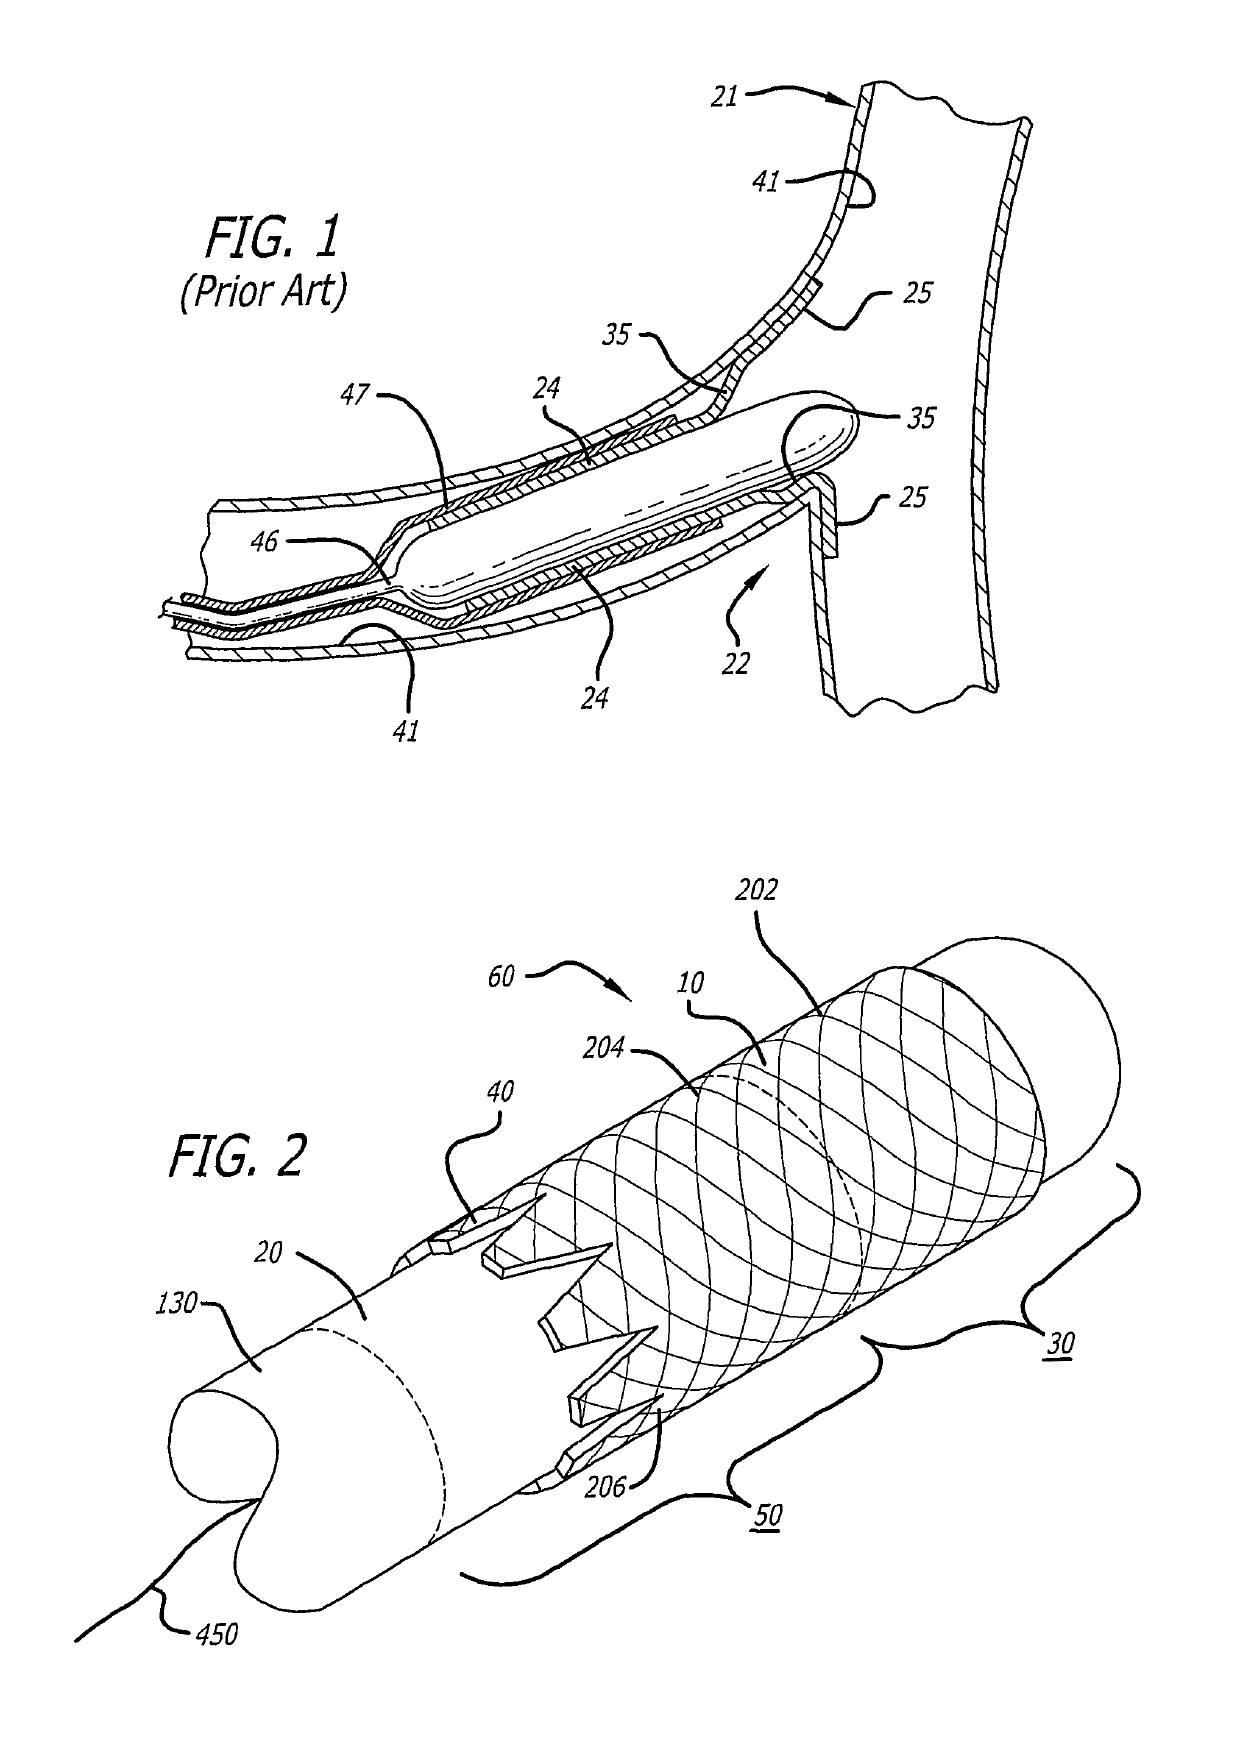 System and method for deploying a proximally-flaring stent